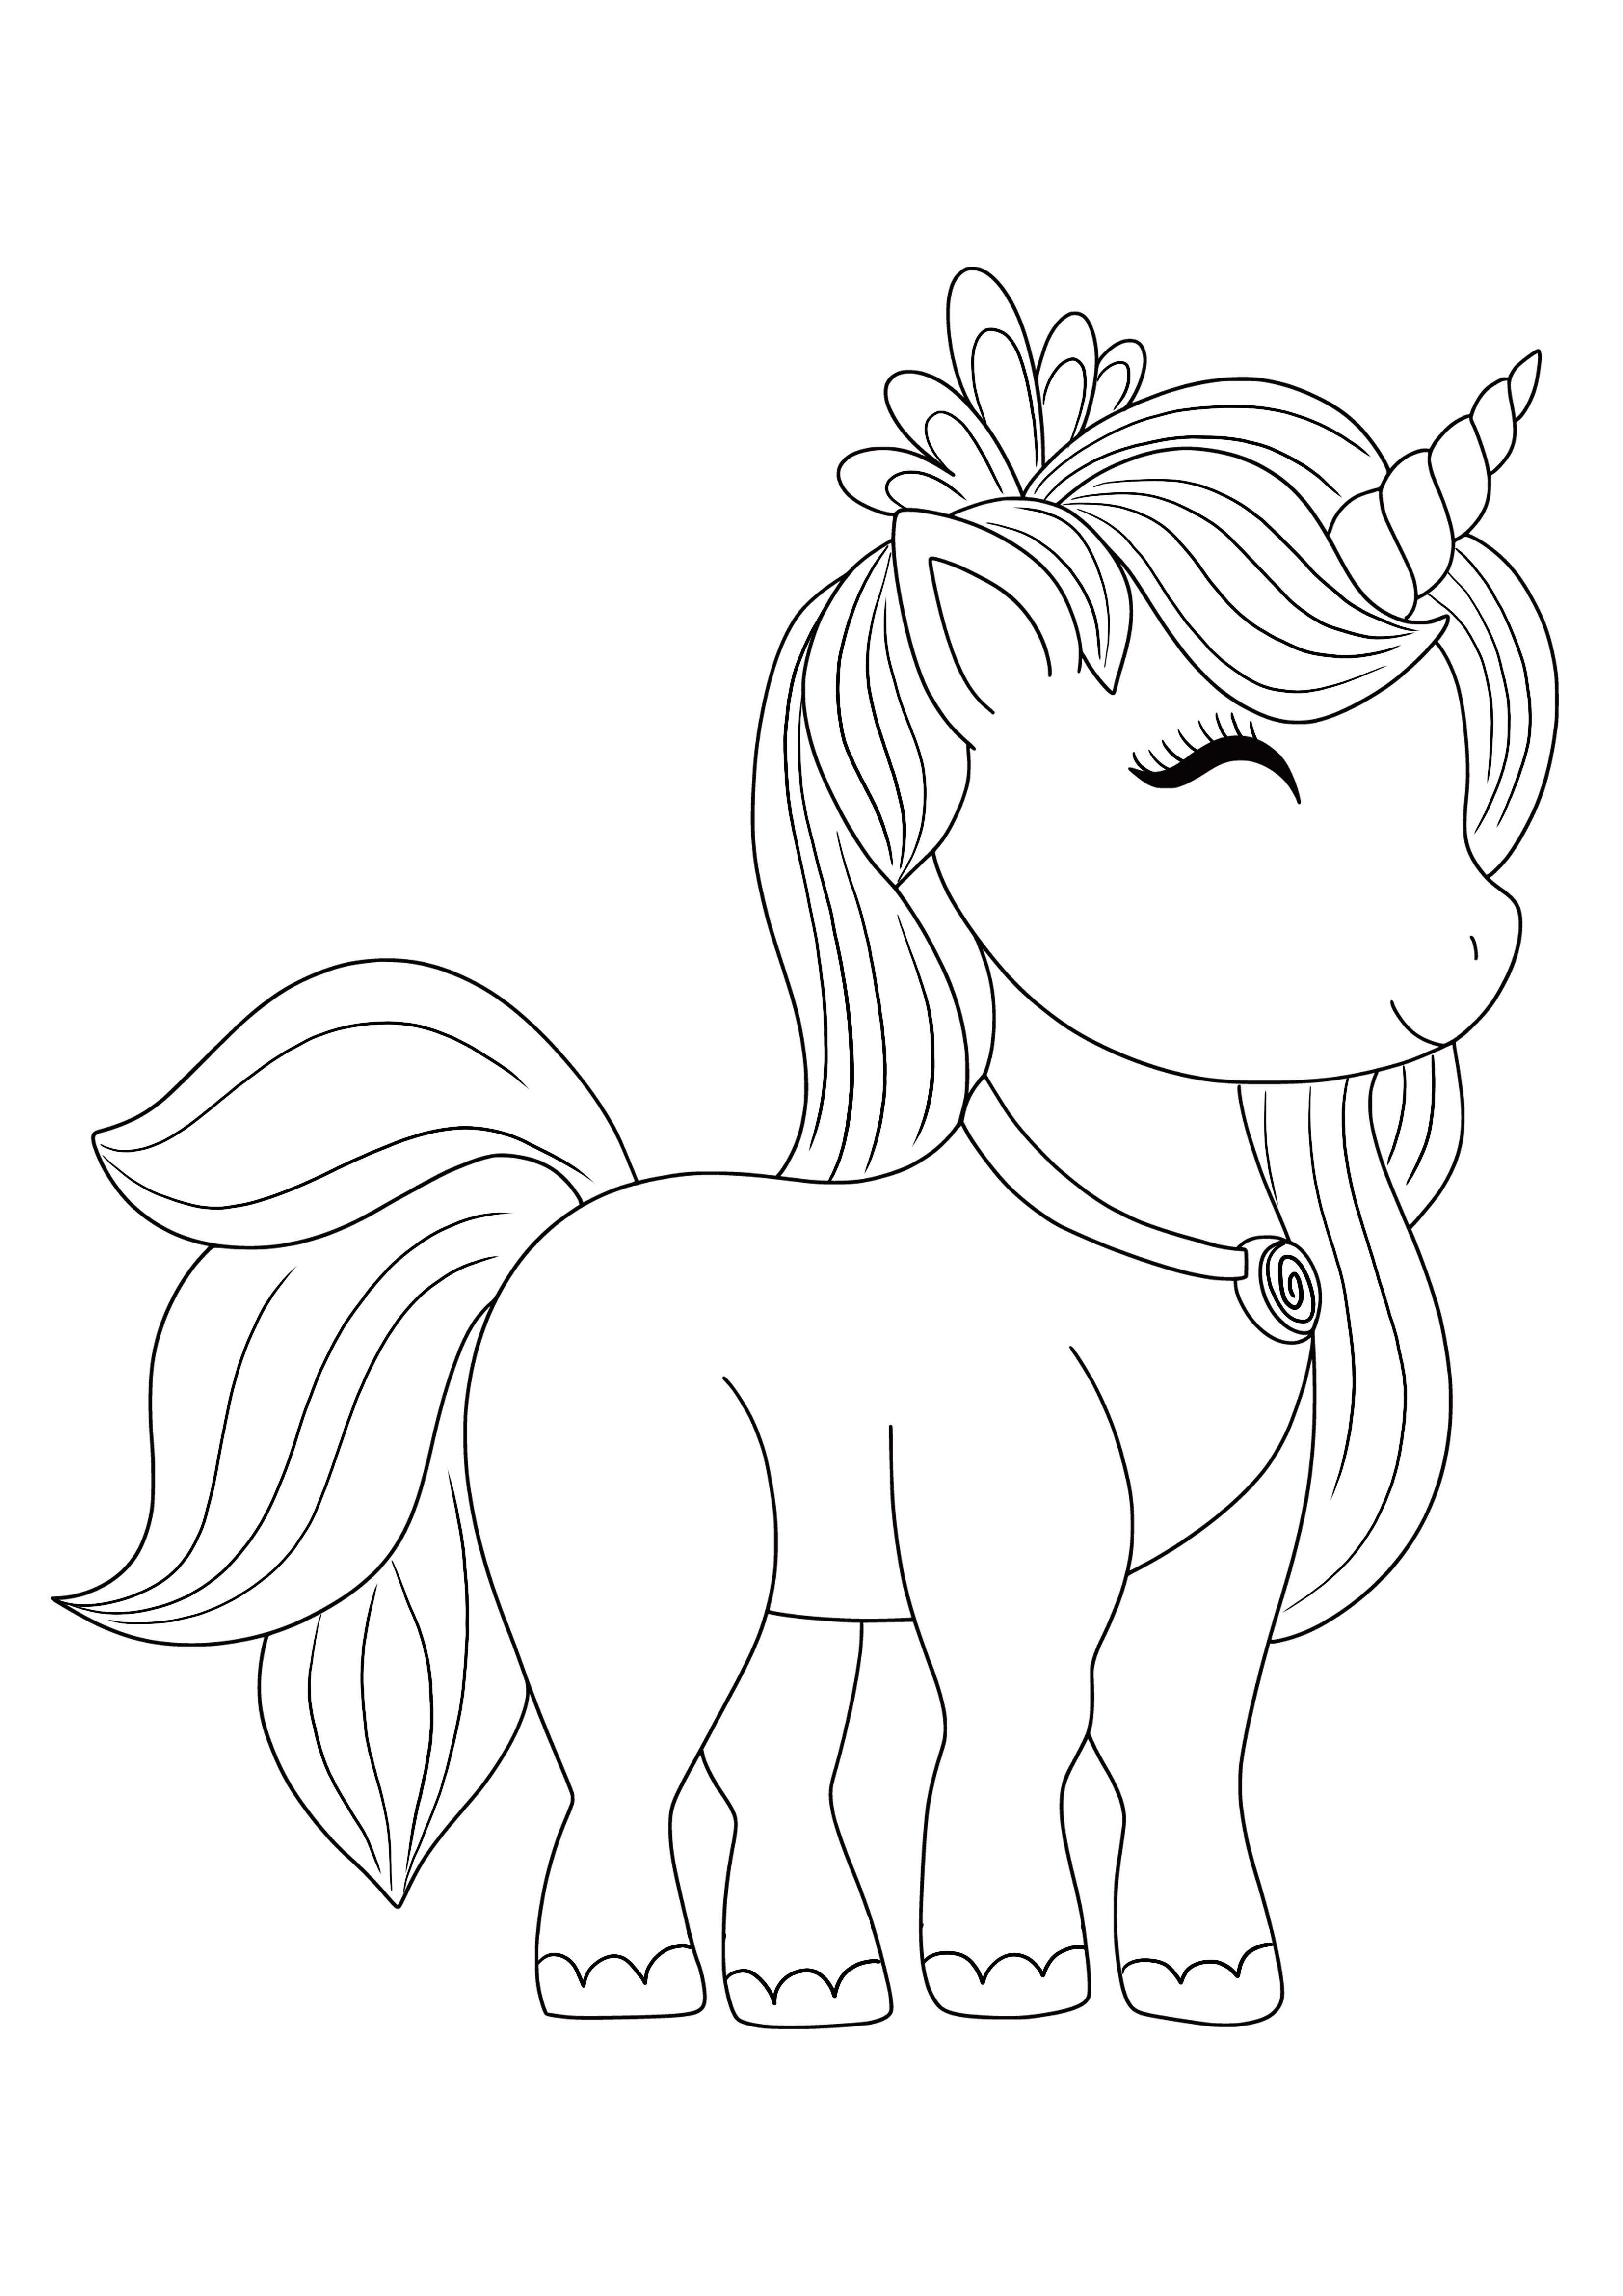 A free Unicorn coloring page to download for free and color